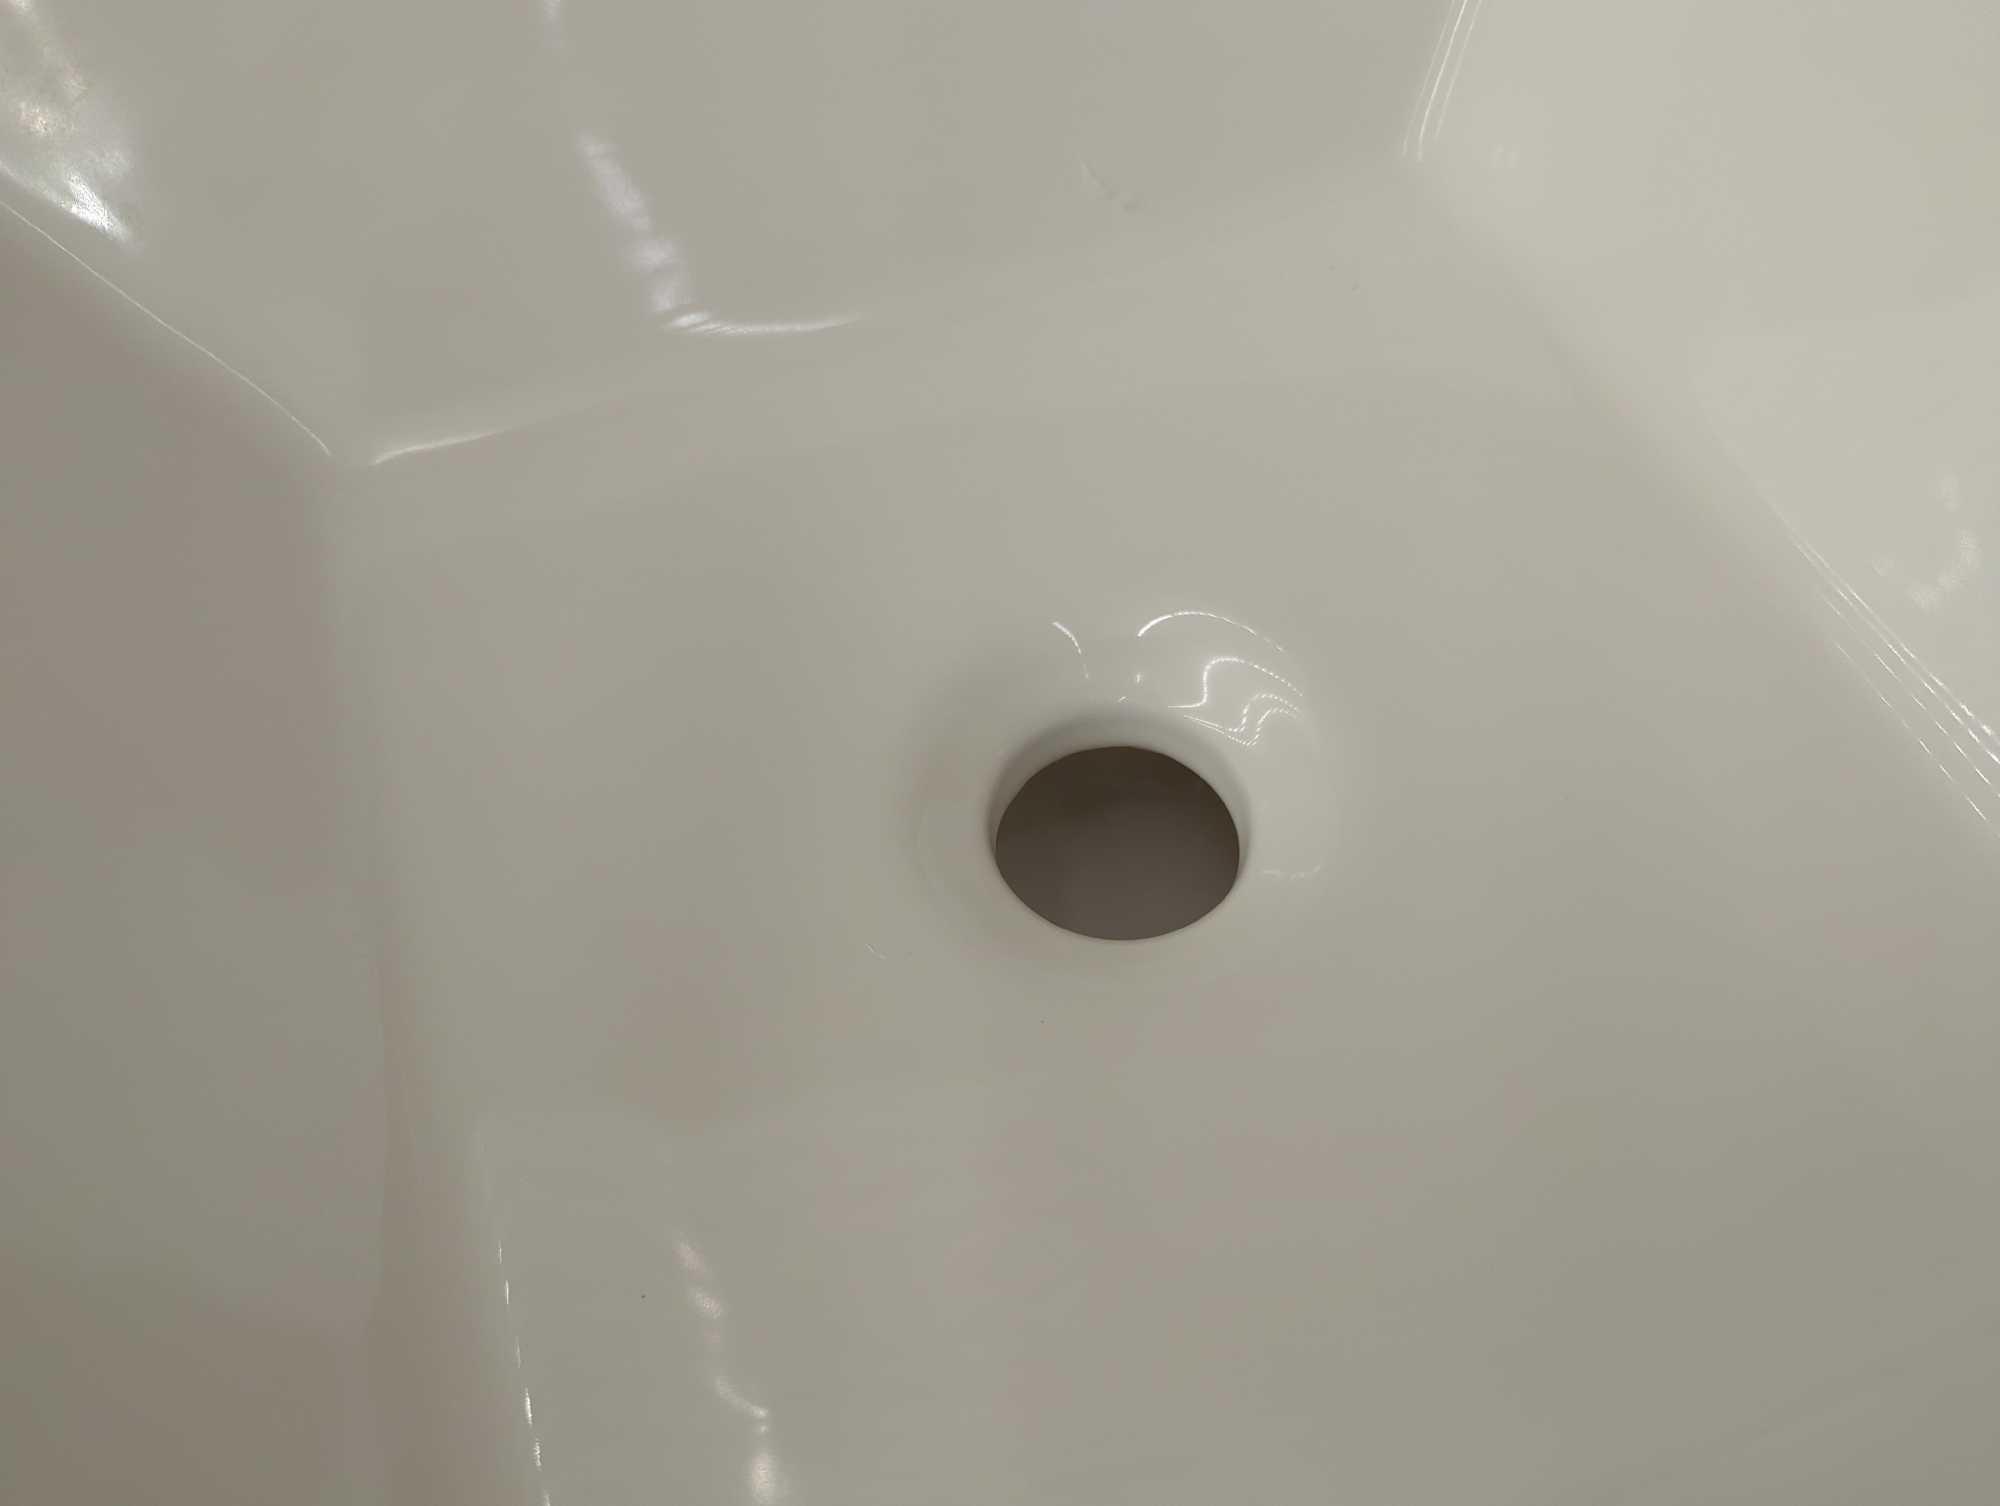 Ceramic Vessel White vanity sink. Comes in open box as is shown in photos. Appears to be new.